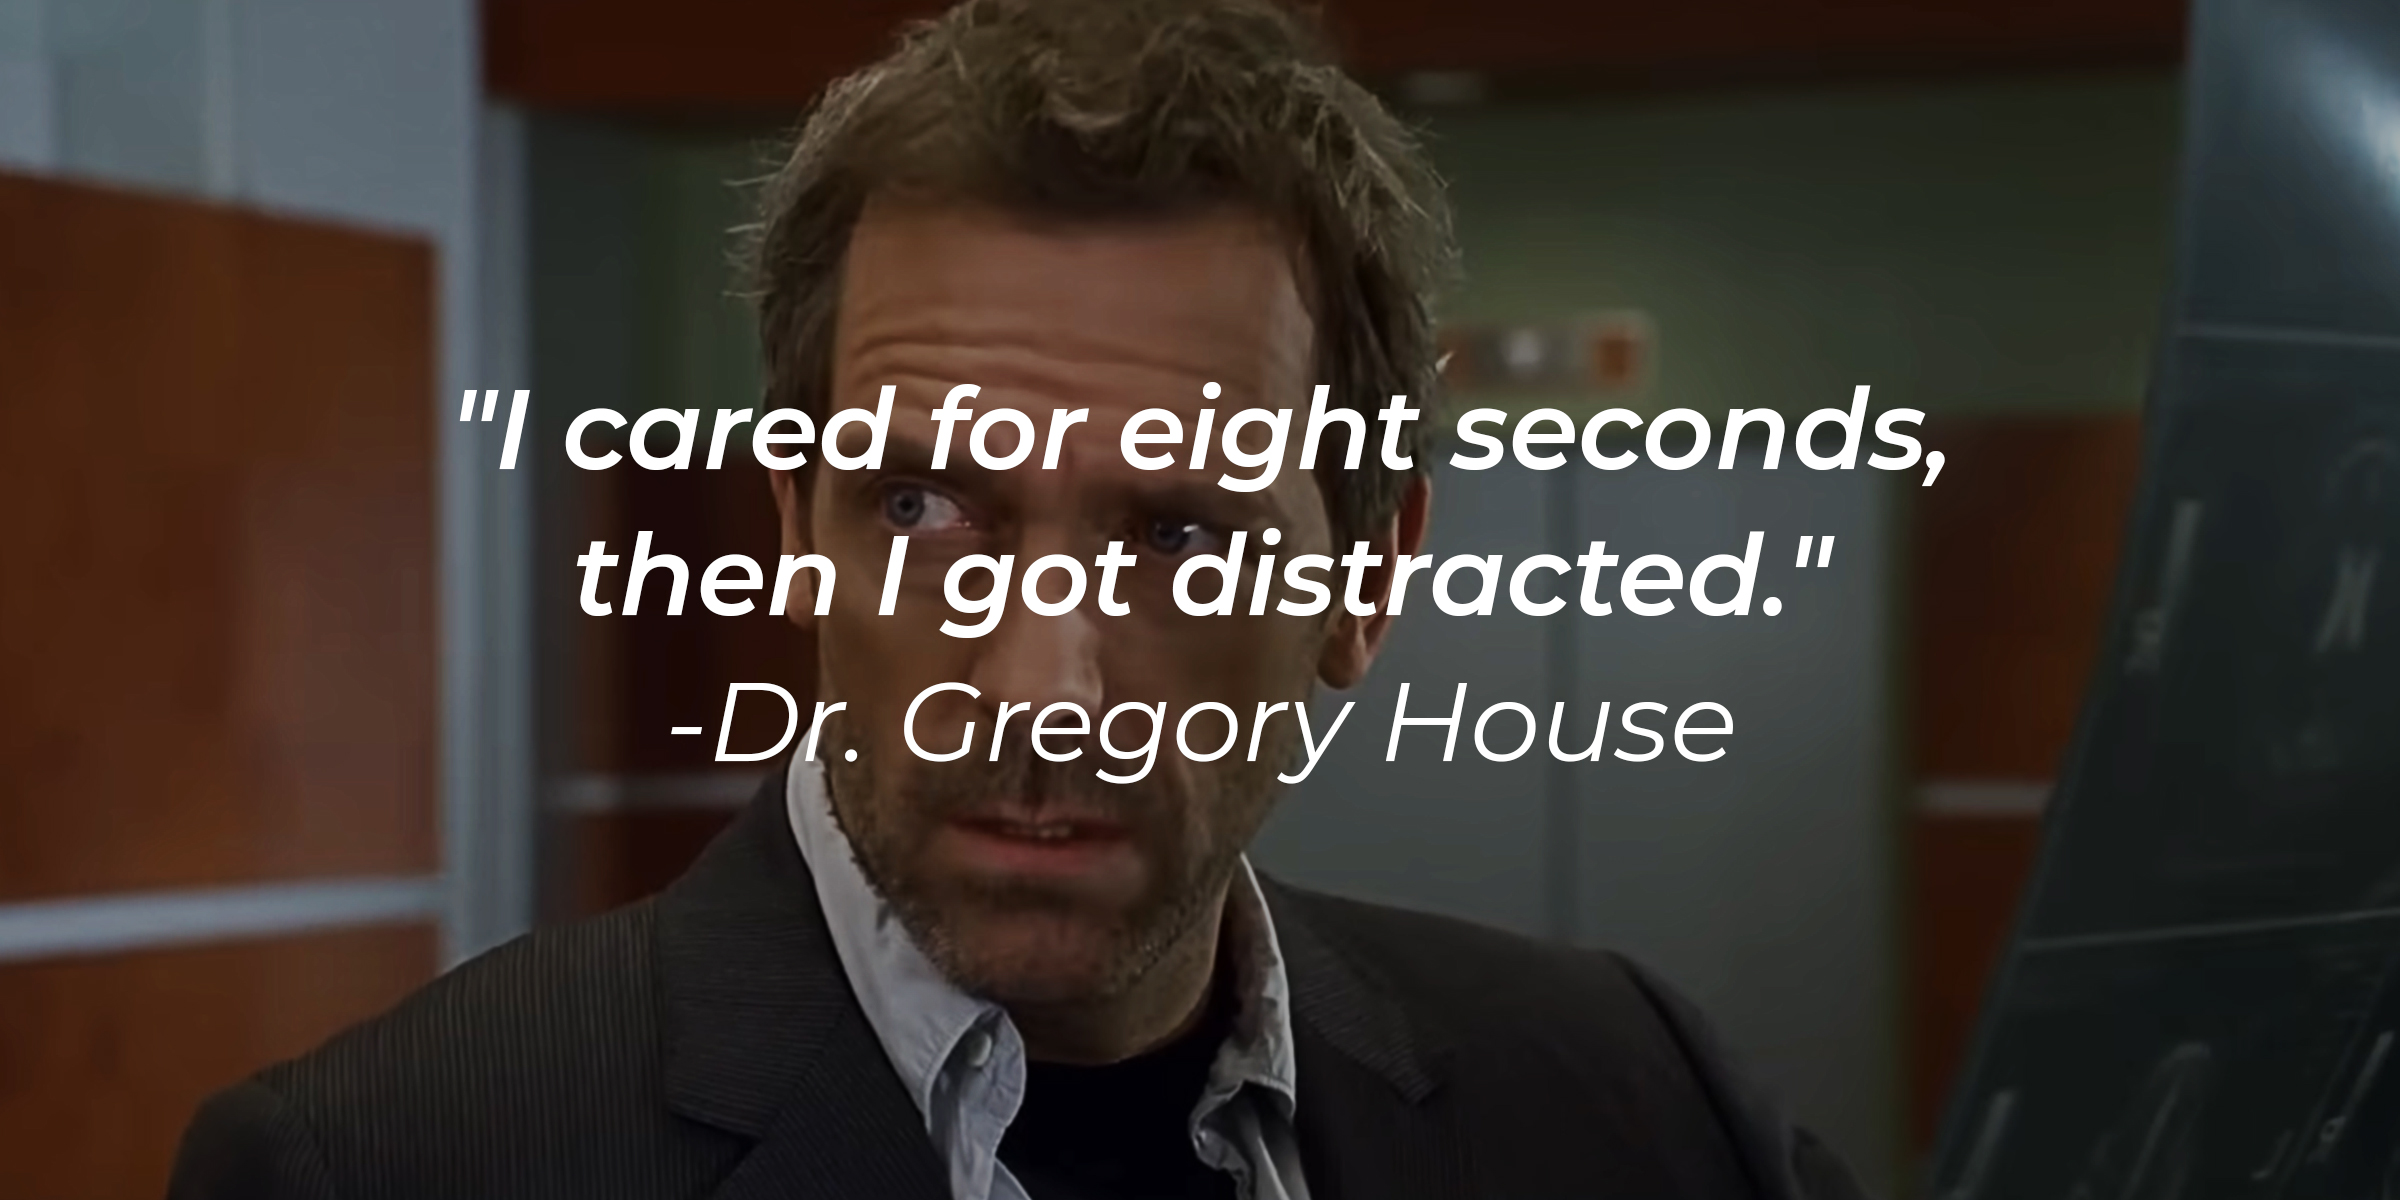 An image of Dr. Gregory House, with his quote: "I cared for eight seconds, then I got distracted." | Source: Youtube.com/House M.D.